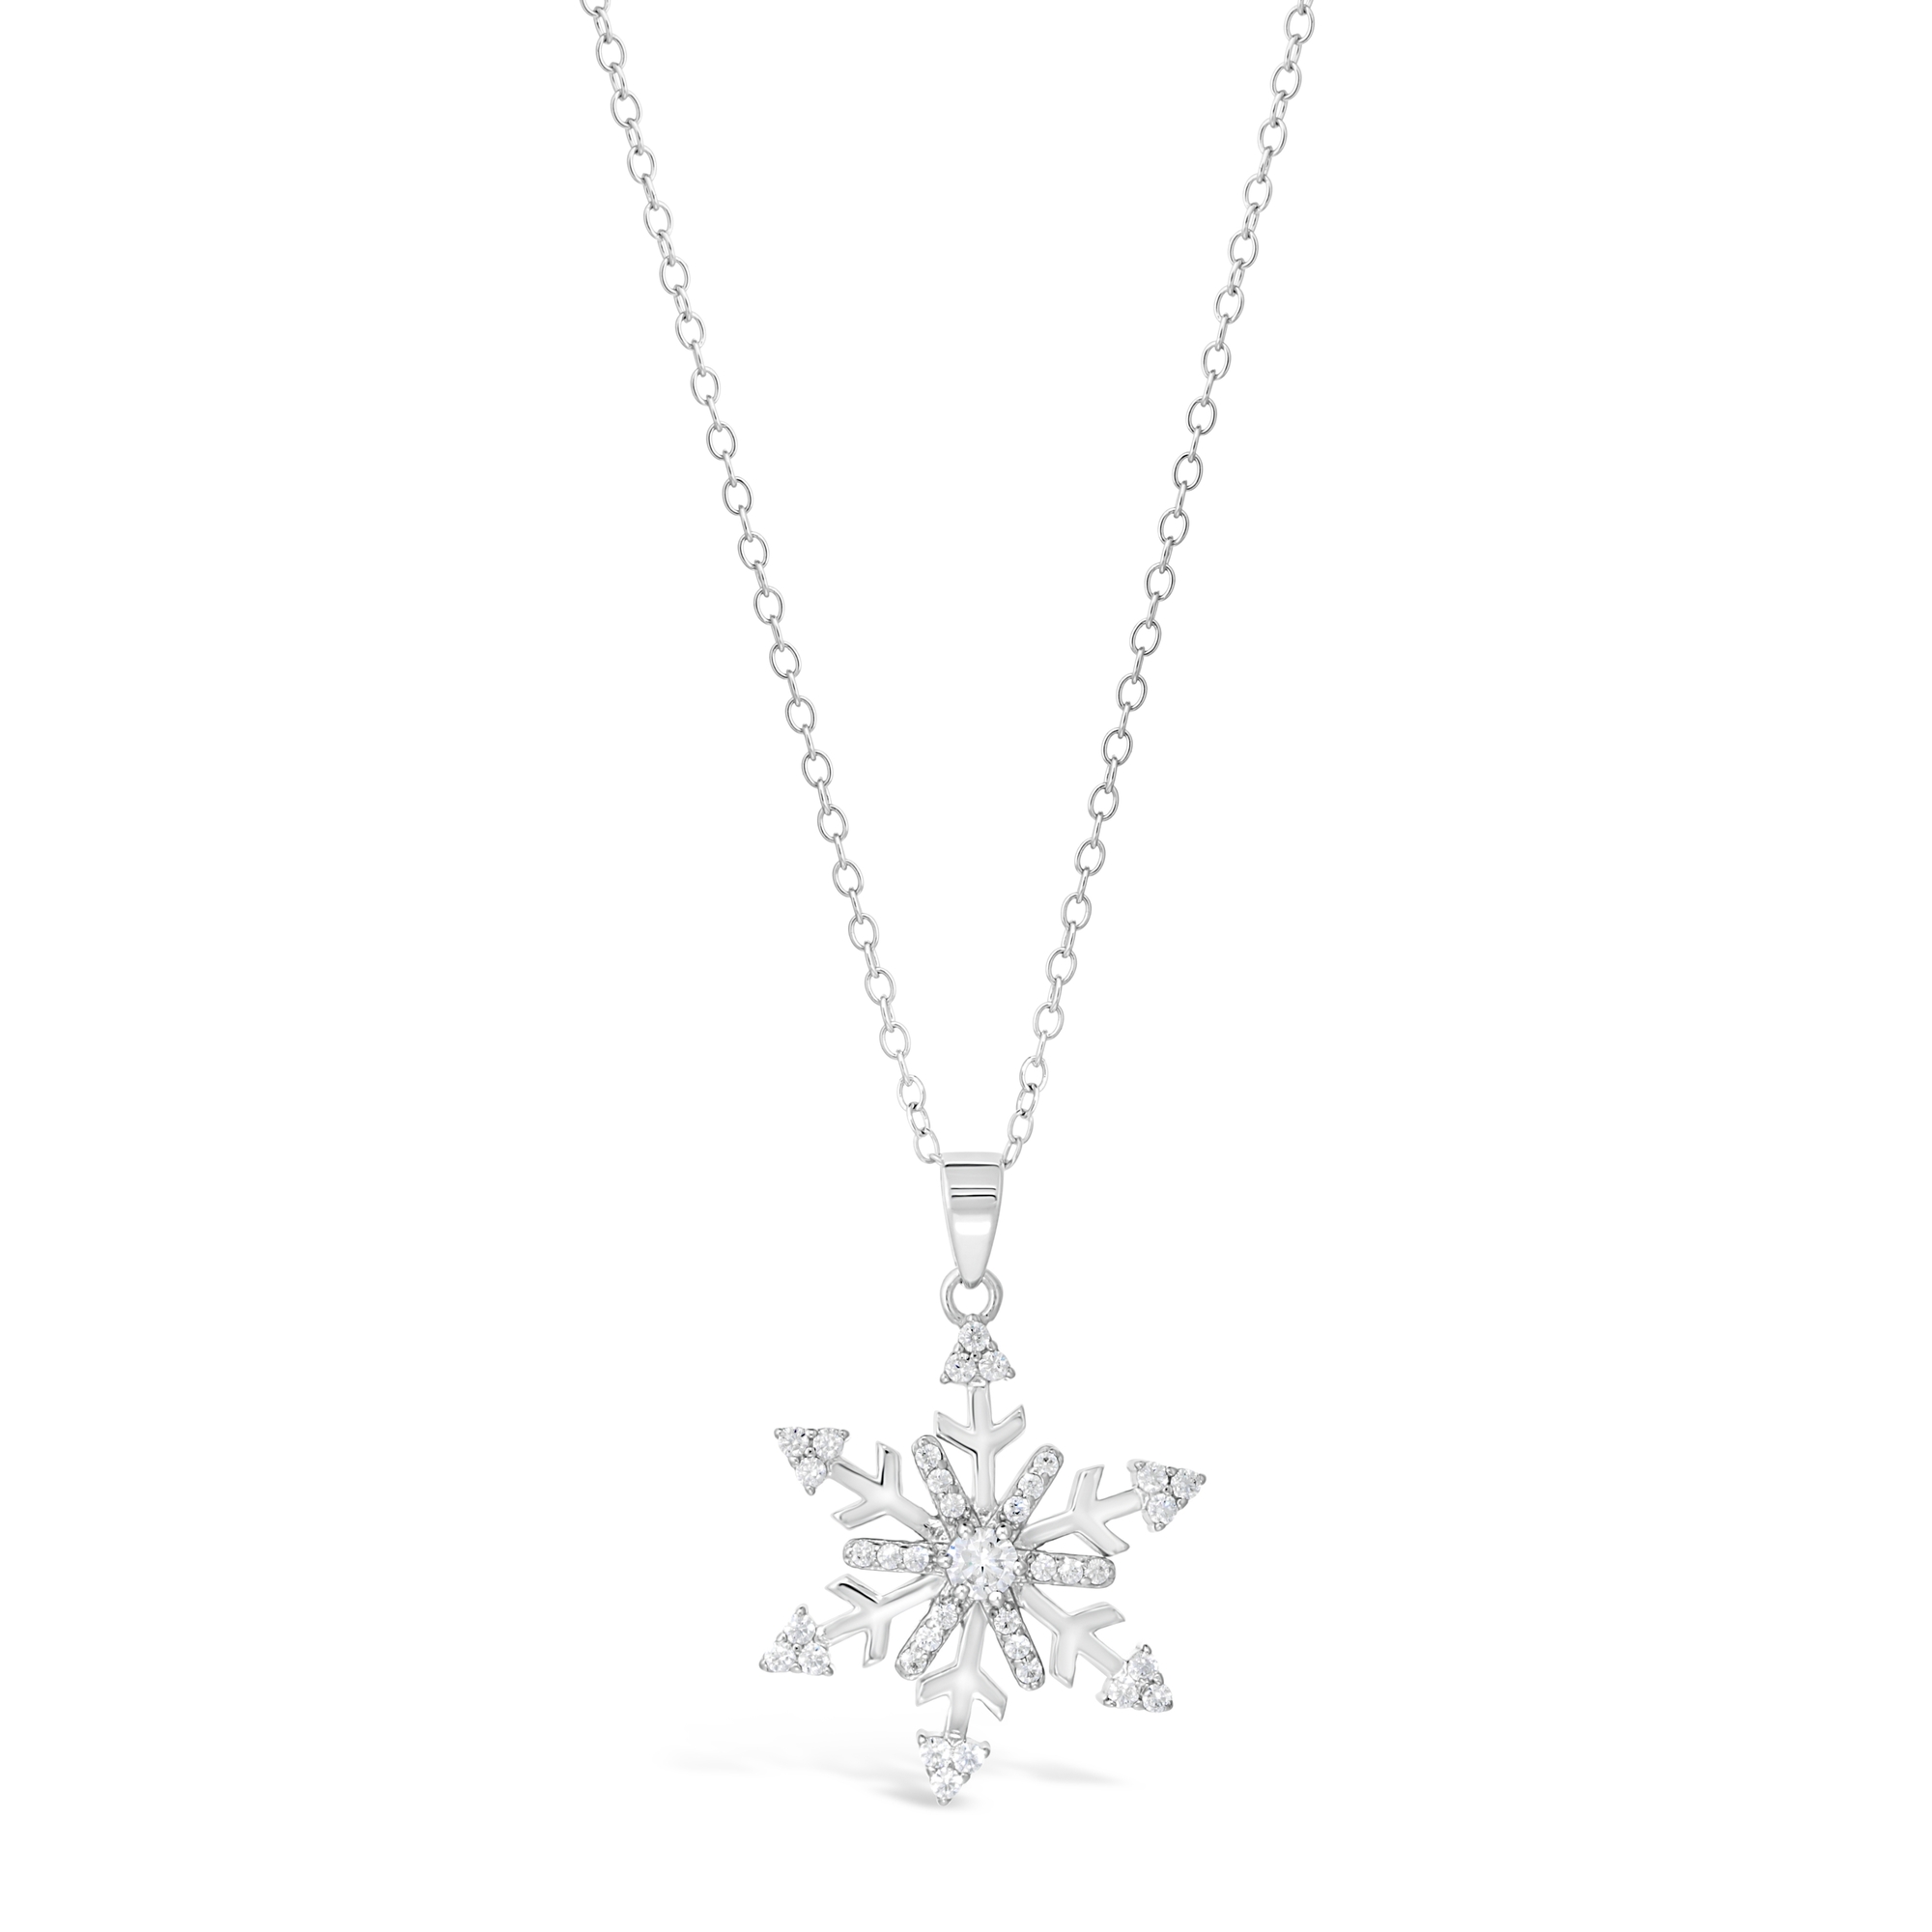 Lavari Jewelers Women's Flurry Snowflake Pendant Necklace with Lobster Clasp, 925 Sterling Silver, Cubic Zirconia, 18" Chain